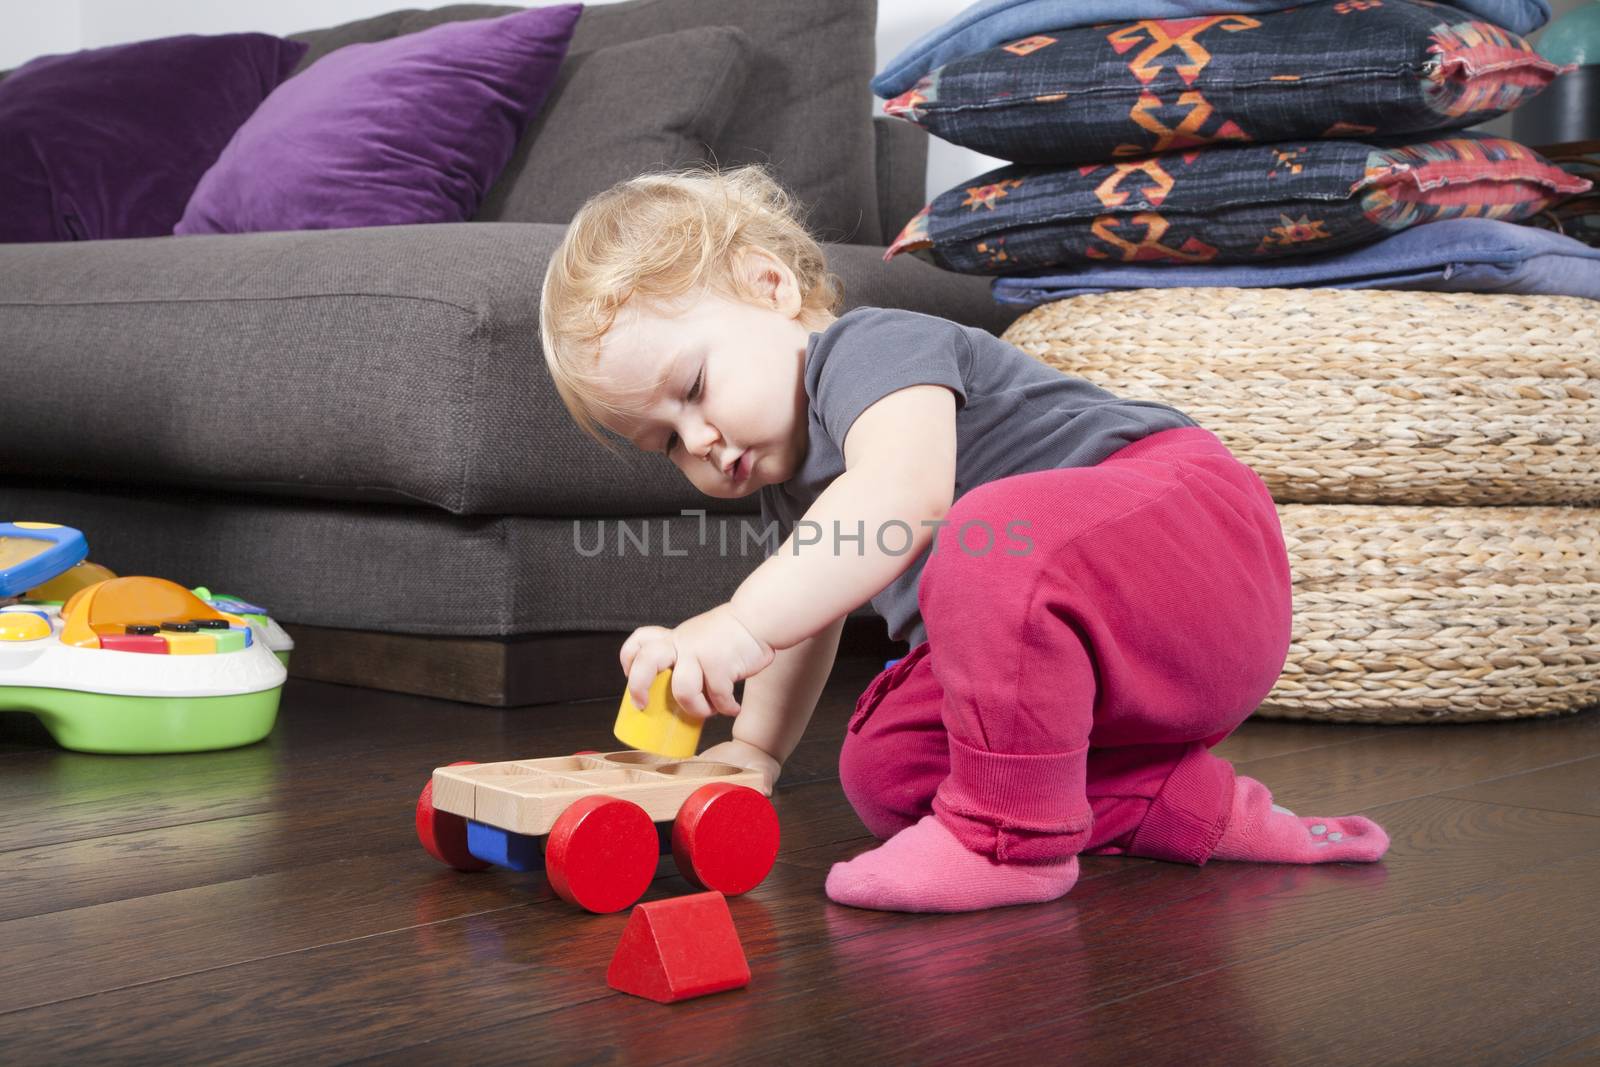 one year age blonde lovely cute caucasian white baby grey shirt pink trousers and shocks playing with wheel wooden colors toys indoor on brown floor